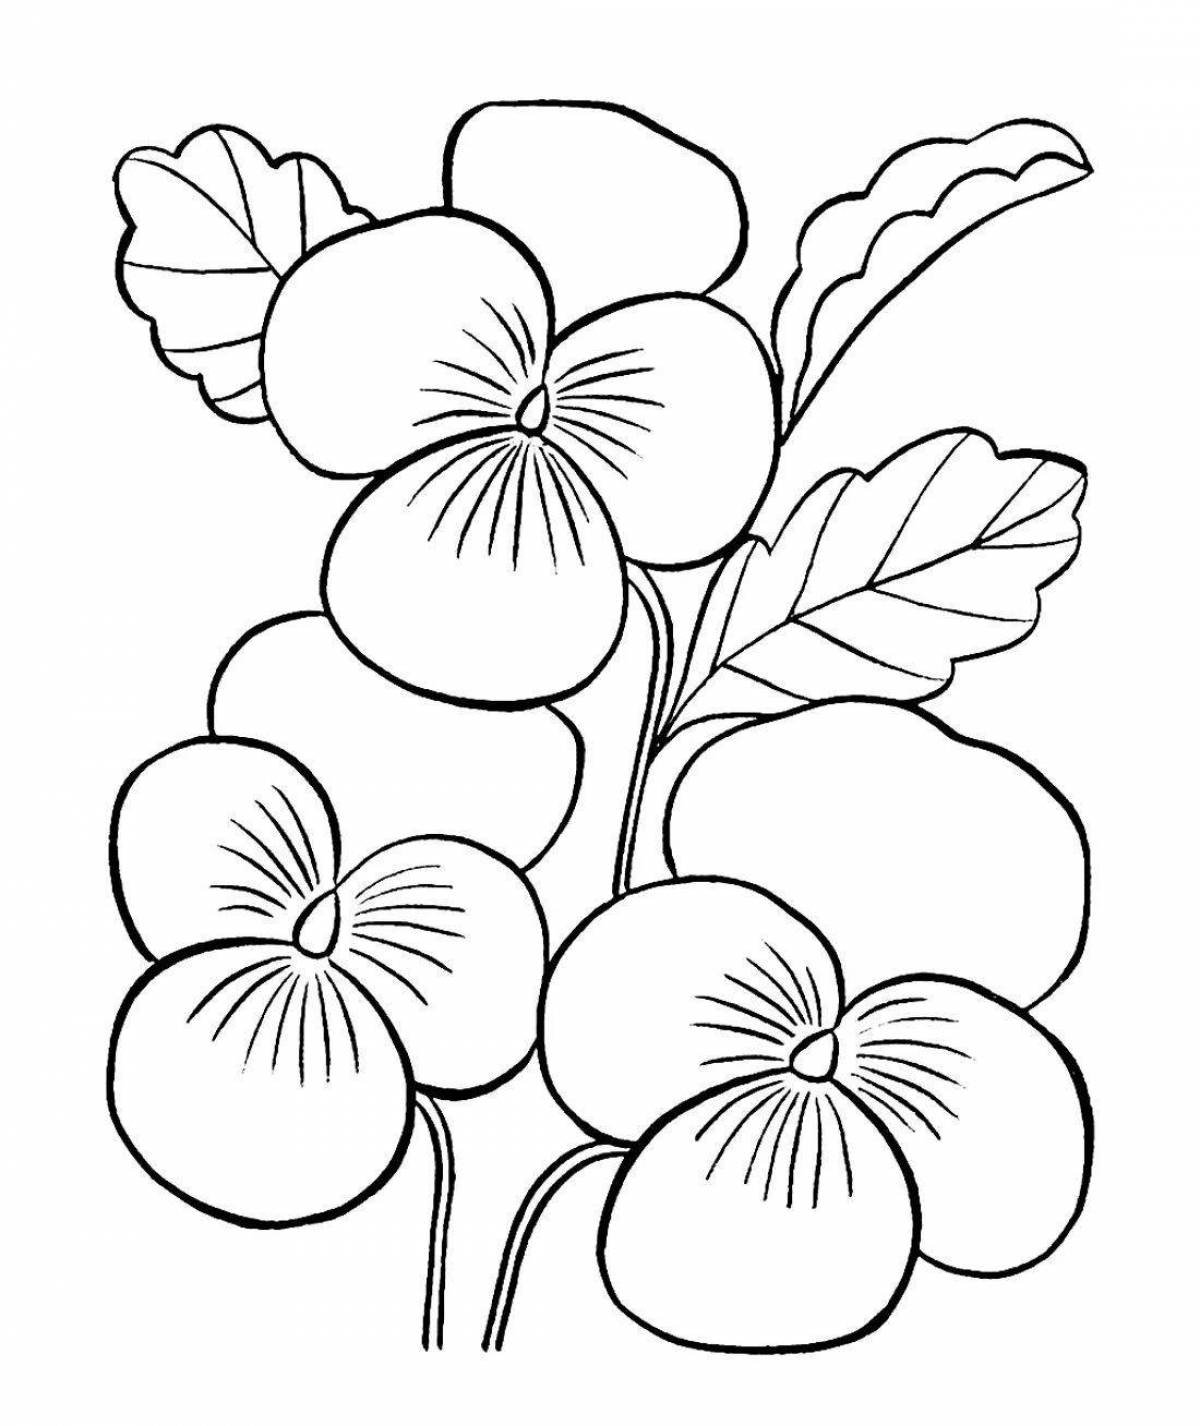 Coloring live flowers